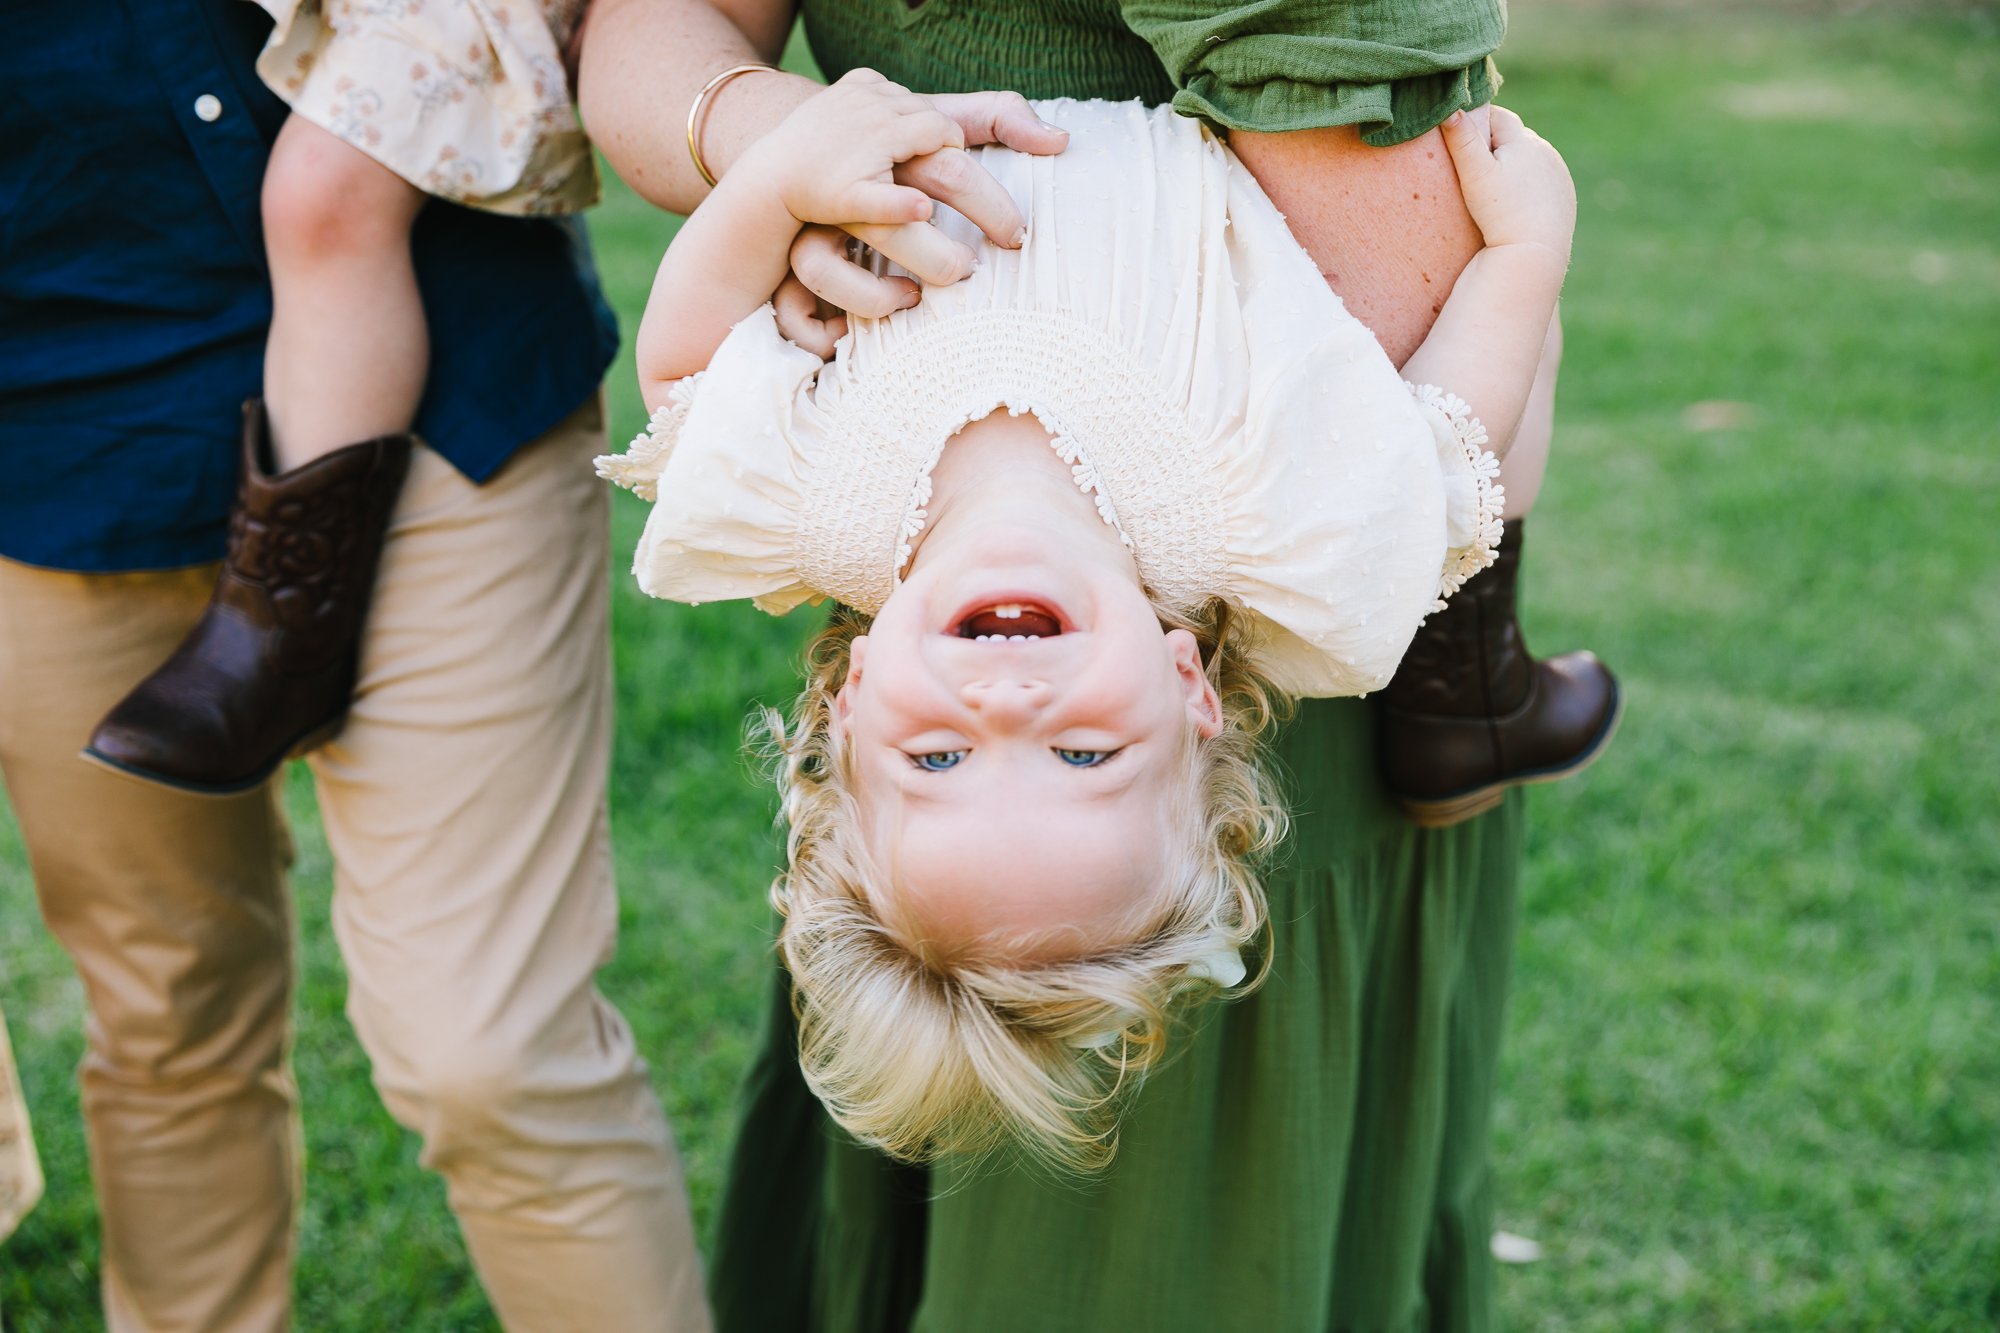 Los_Angeles_Family_Photographer_Golden_Hour_Mini_Session_Fall_Photos_Holiday_Card_Kids_Babies_Children_Luxury_Best_California_Photography-0156.jpg